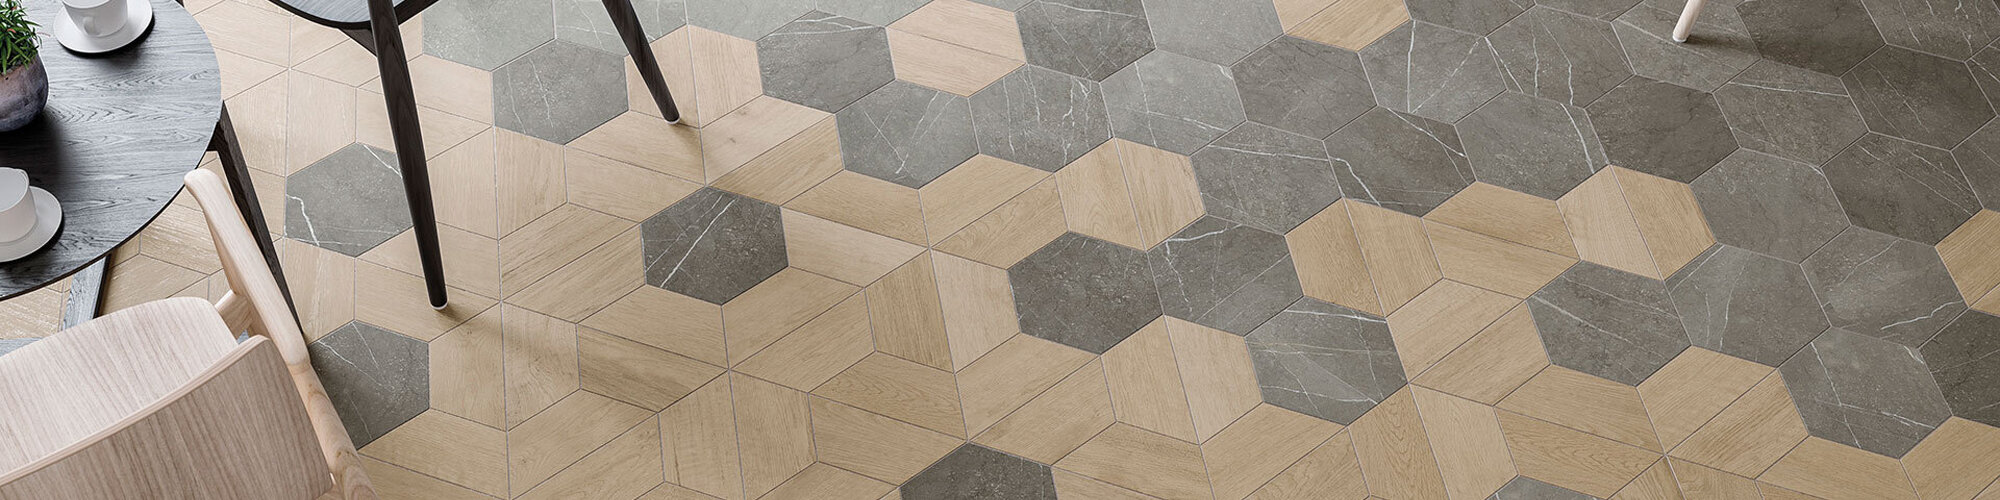 Tile Patterns And Layout Ideas Tile Lines